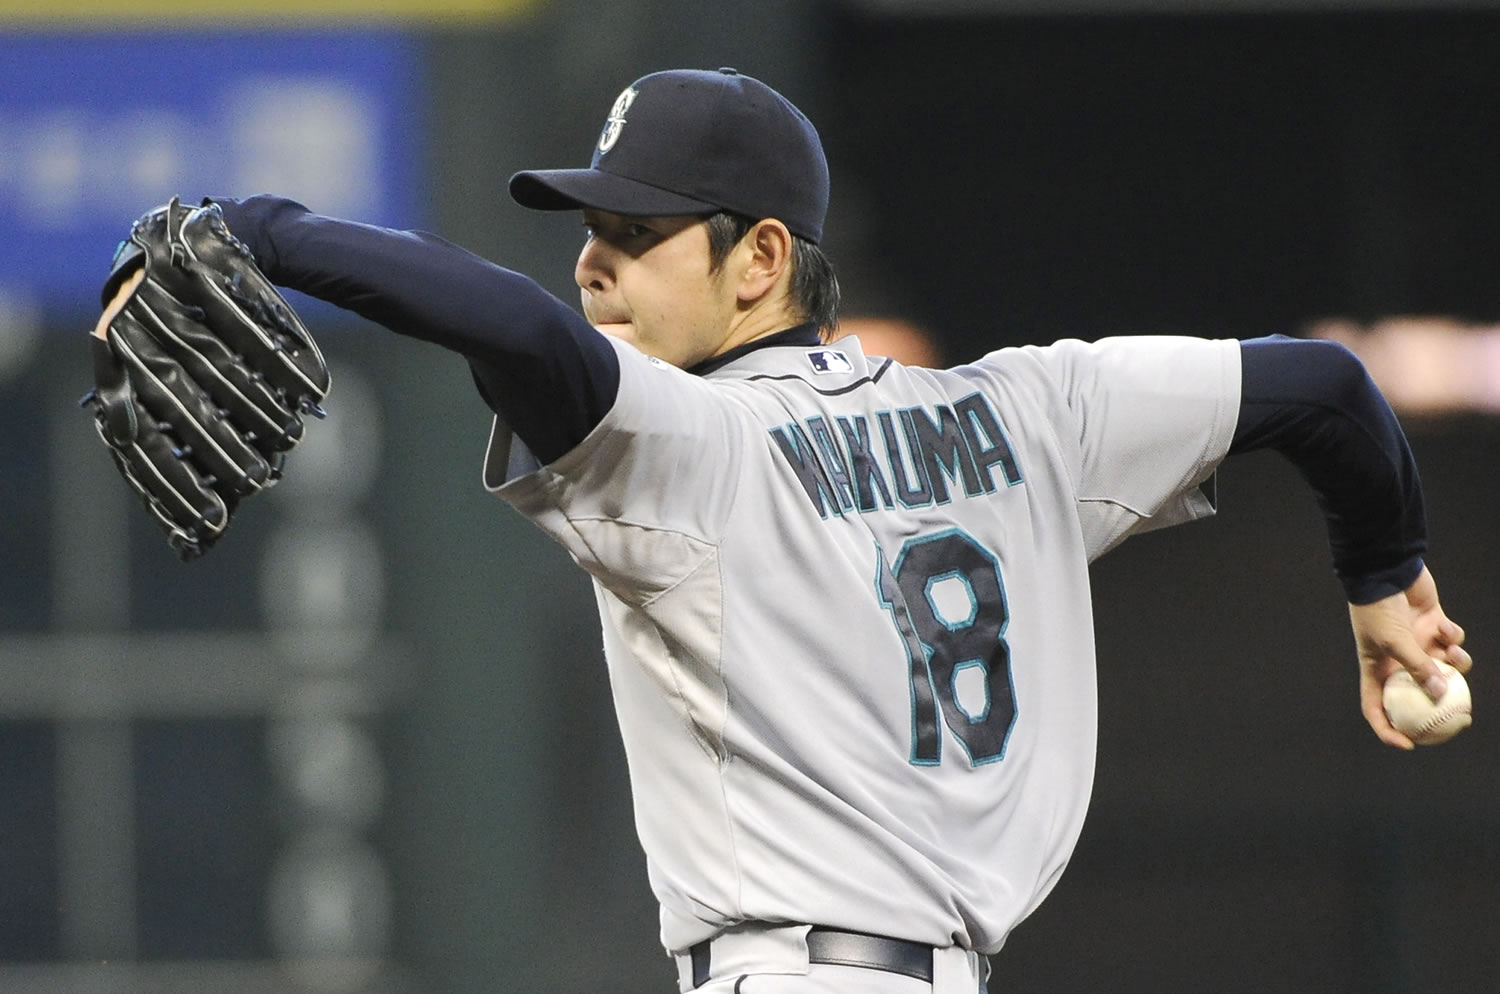 Seattle's Hisashi Iwakuma pitched seven scoreless innings Sunday at Houston, but the bullpen couldn't preserve the shutout as the Astros won 2-0.